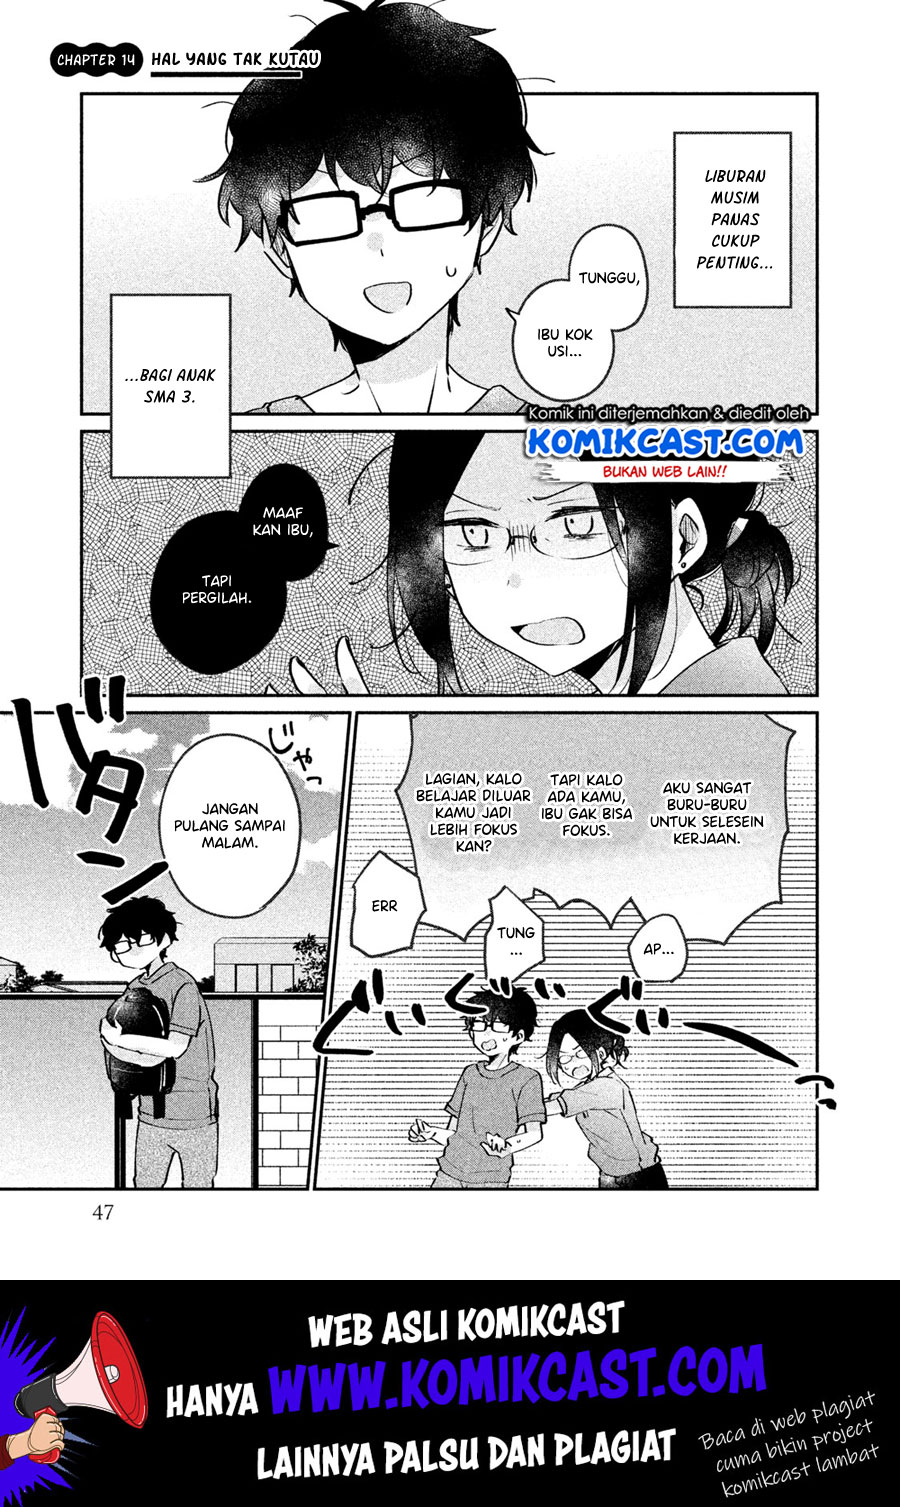 It’s Not Meguro-san’s First Time Chapter 14